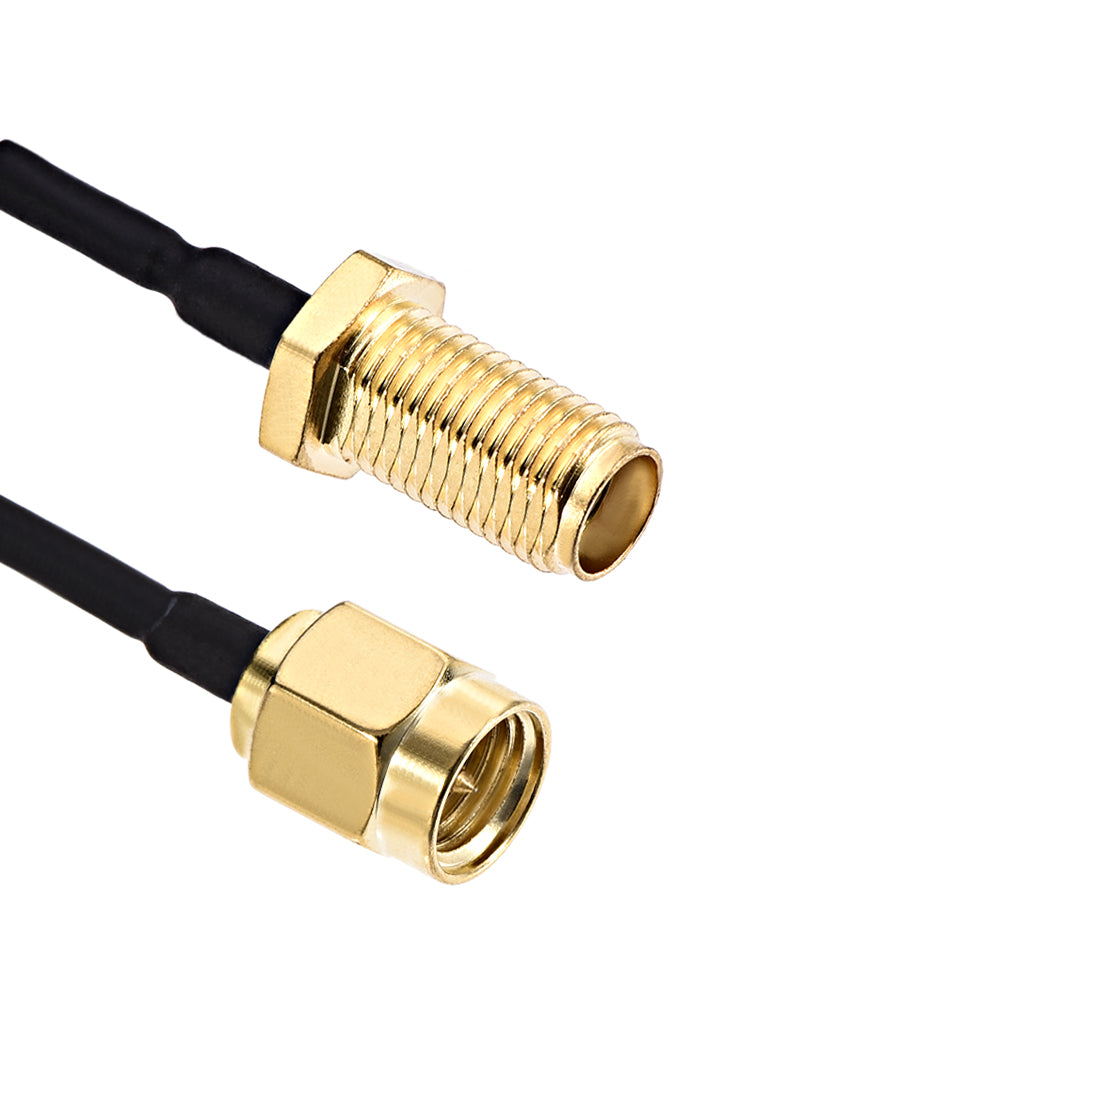 Uxcell Uxcell Low Loss RF Coaxial Cable RG-178 SMA Male to SMA Female 19.7inch